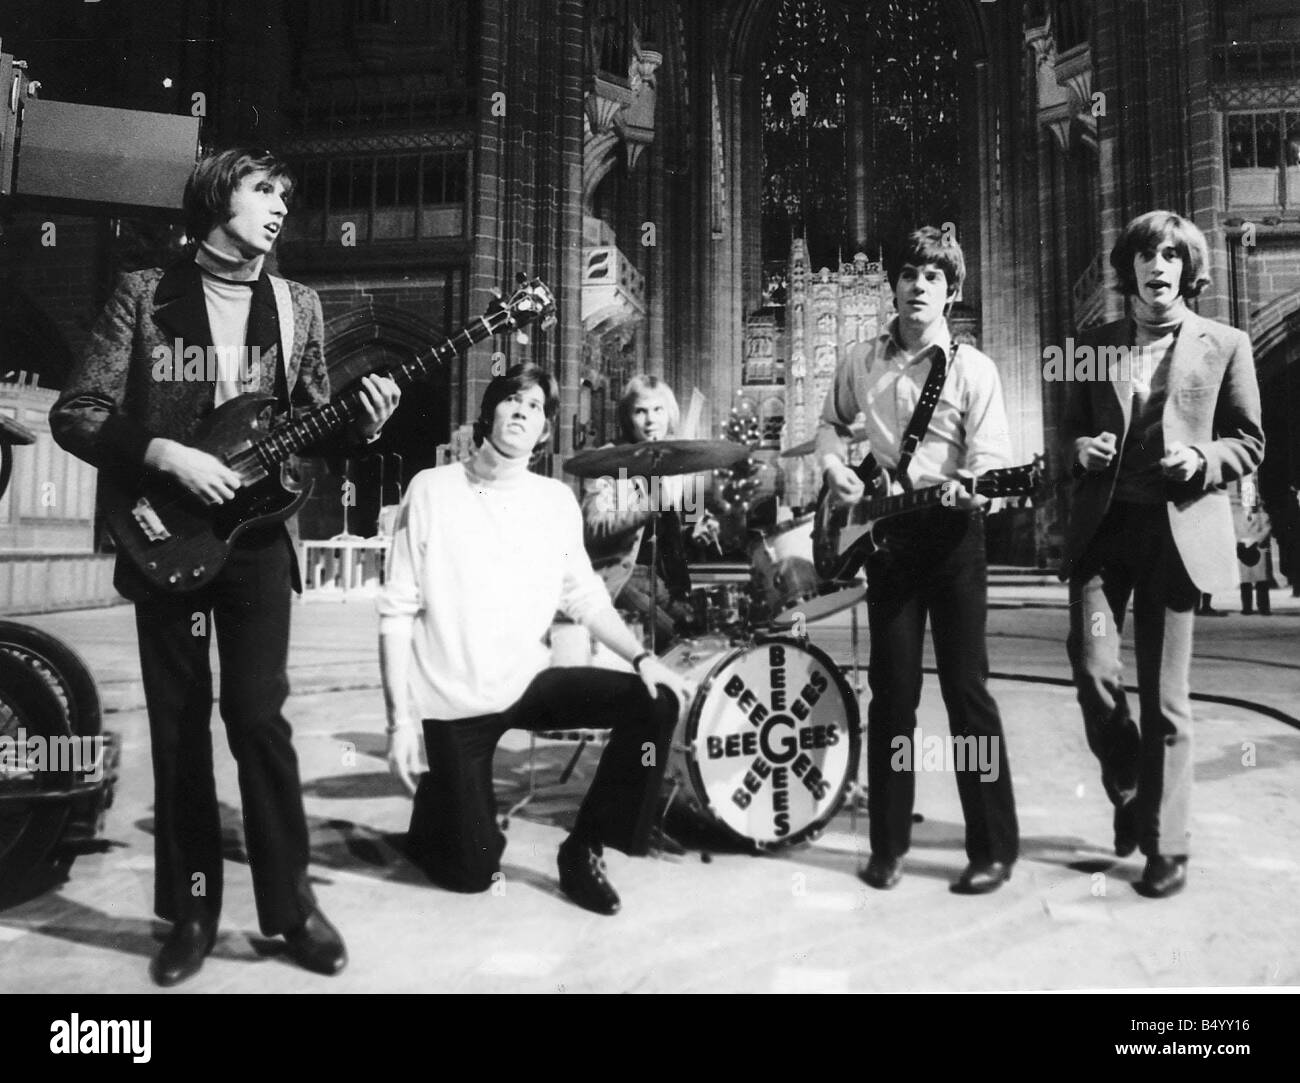 The Bee Gees pop group 1967 Barry Gibb Maurice Gibb Robin Gibb Colin Petersen and Vince Melouney Stock Photo